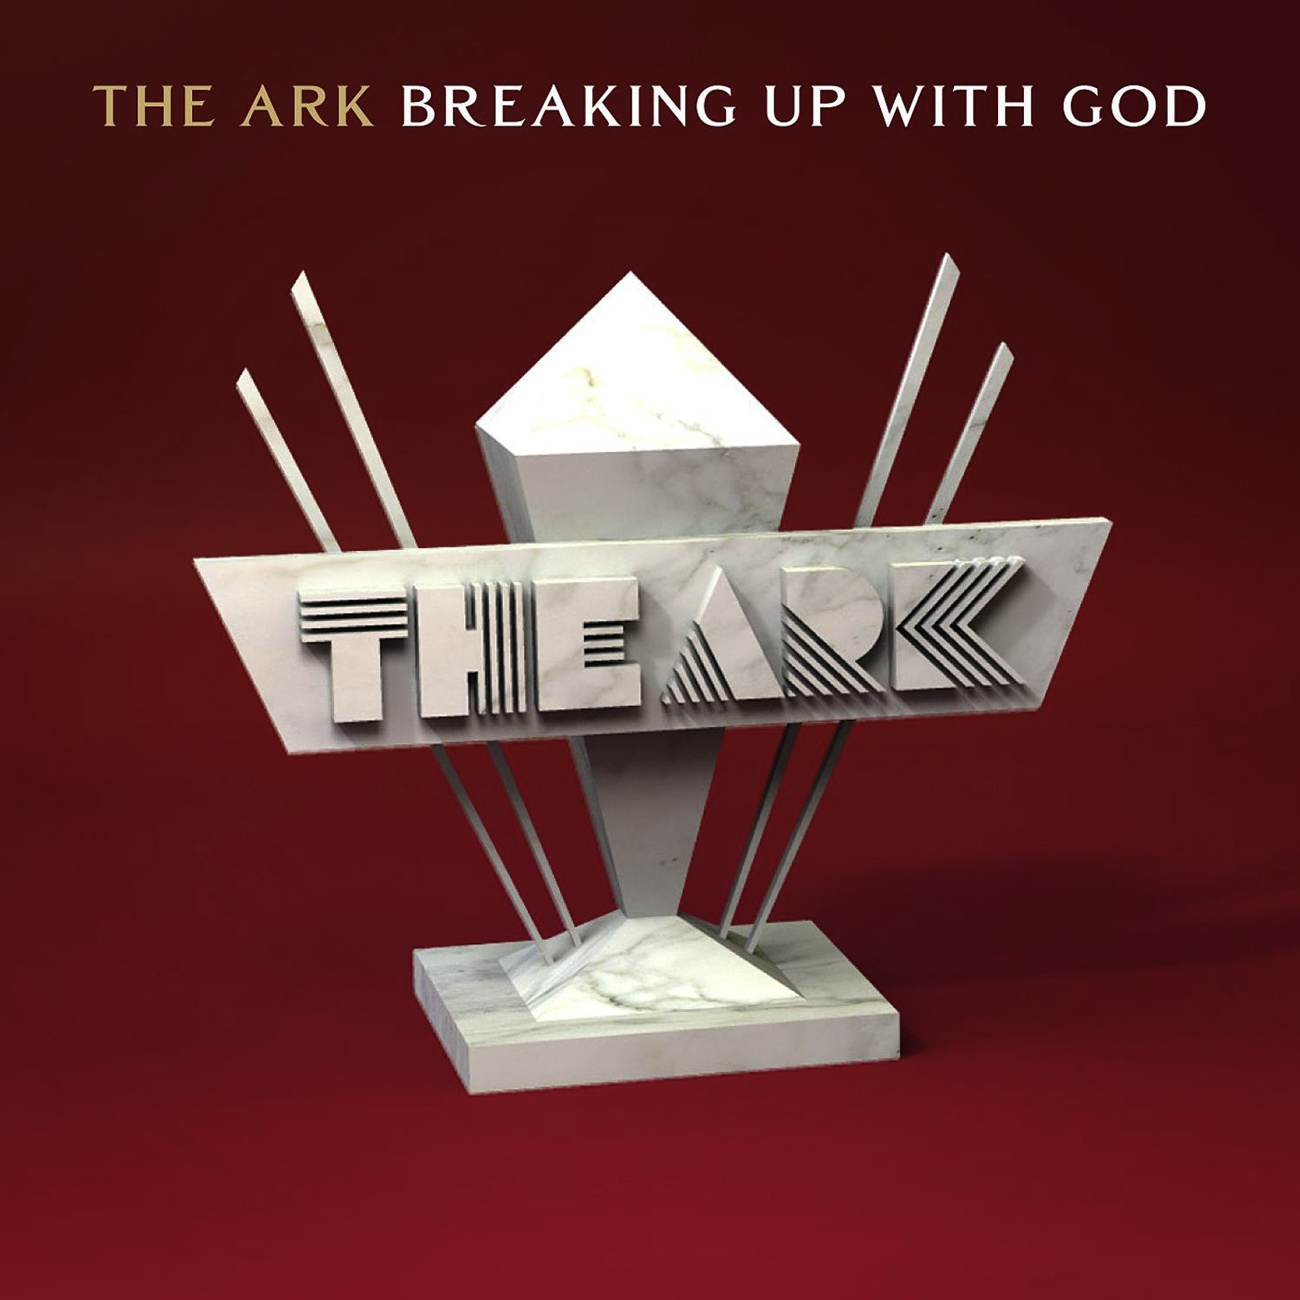 Breaking up with God